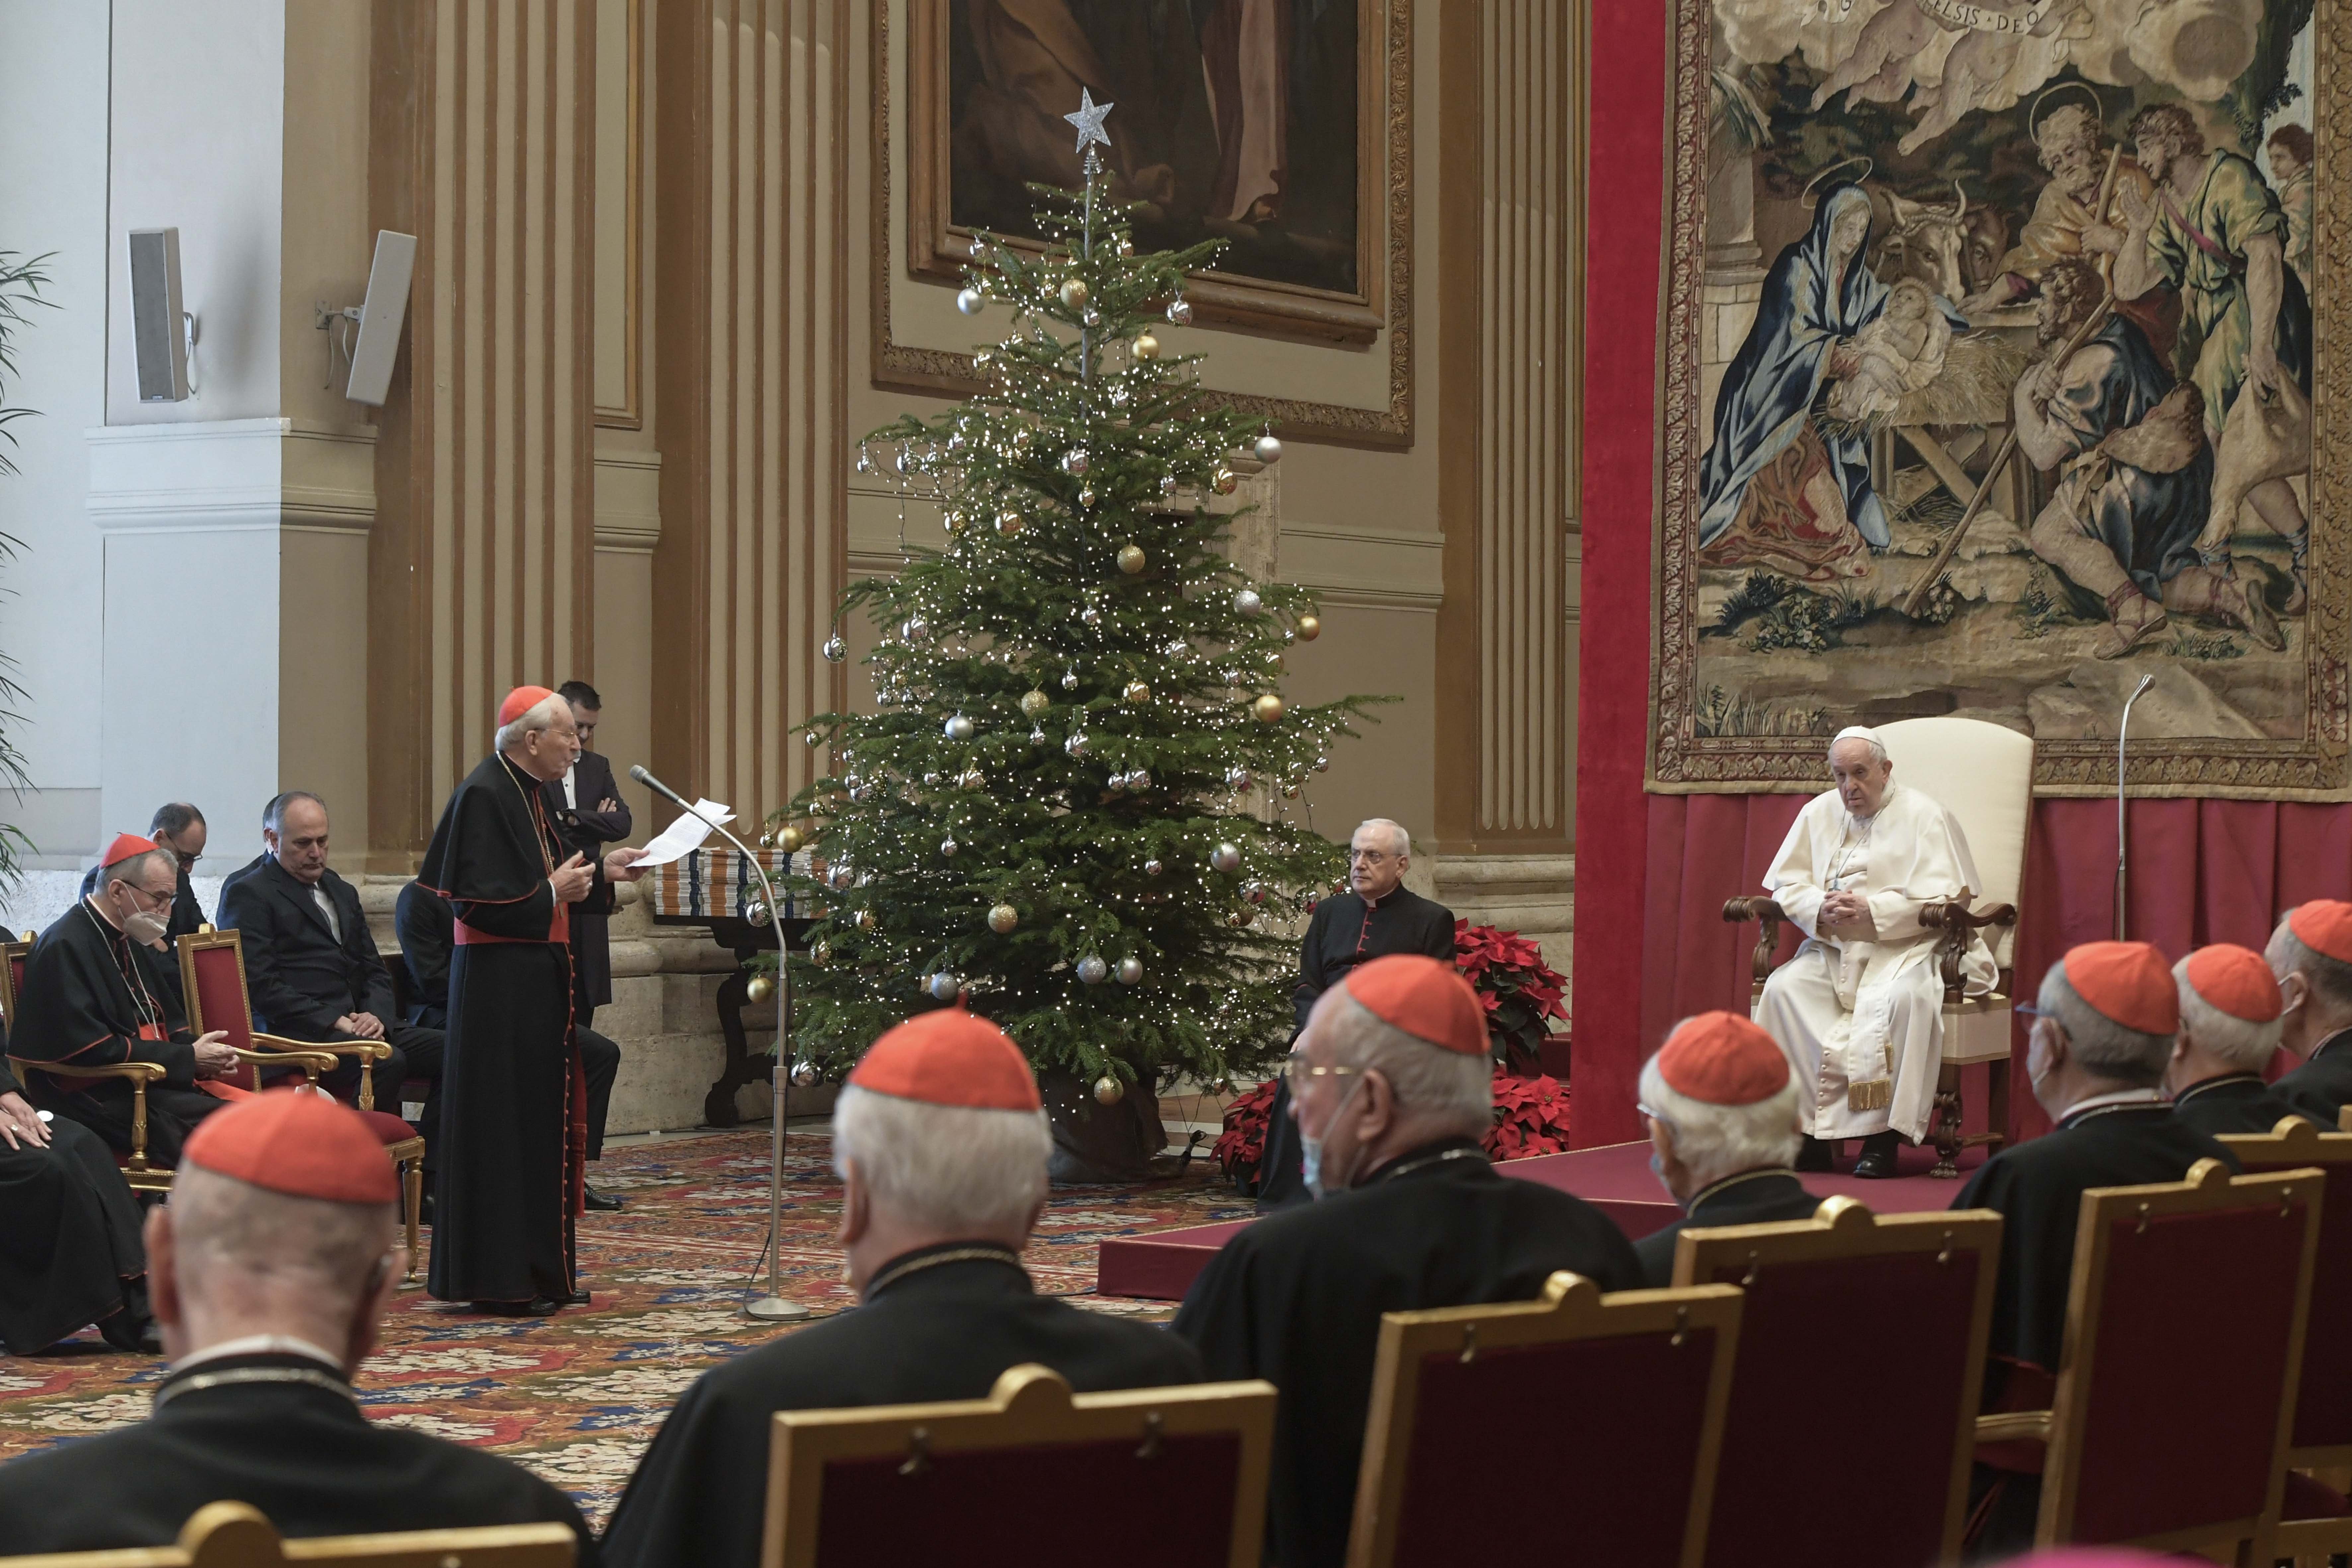 Cardinal Giovanni Battista Re, dean of the College of Cardinals, offers Pope Francis best wishes for Christmas on behalf of the cardinals and top officials of the Roman Curia during an audience in the Apostolic Palace at the Vatican Dec. 23, 2021. (CNS photo/Vatican Media)